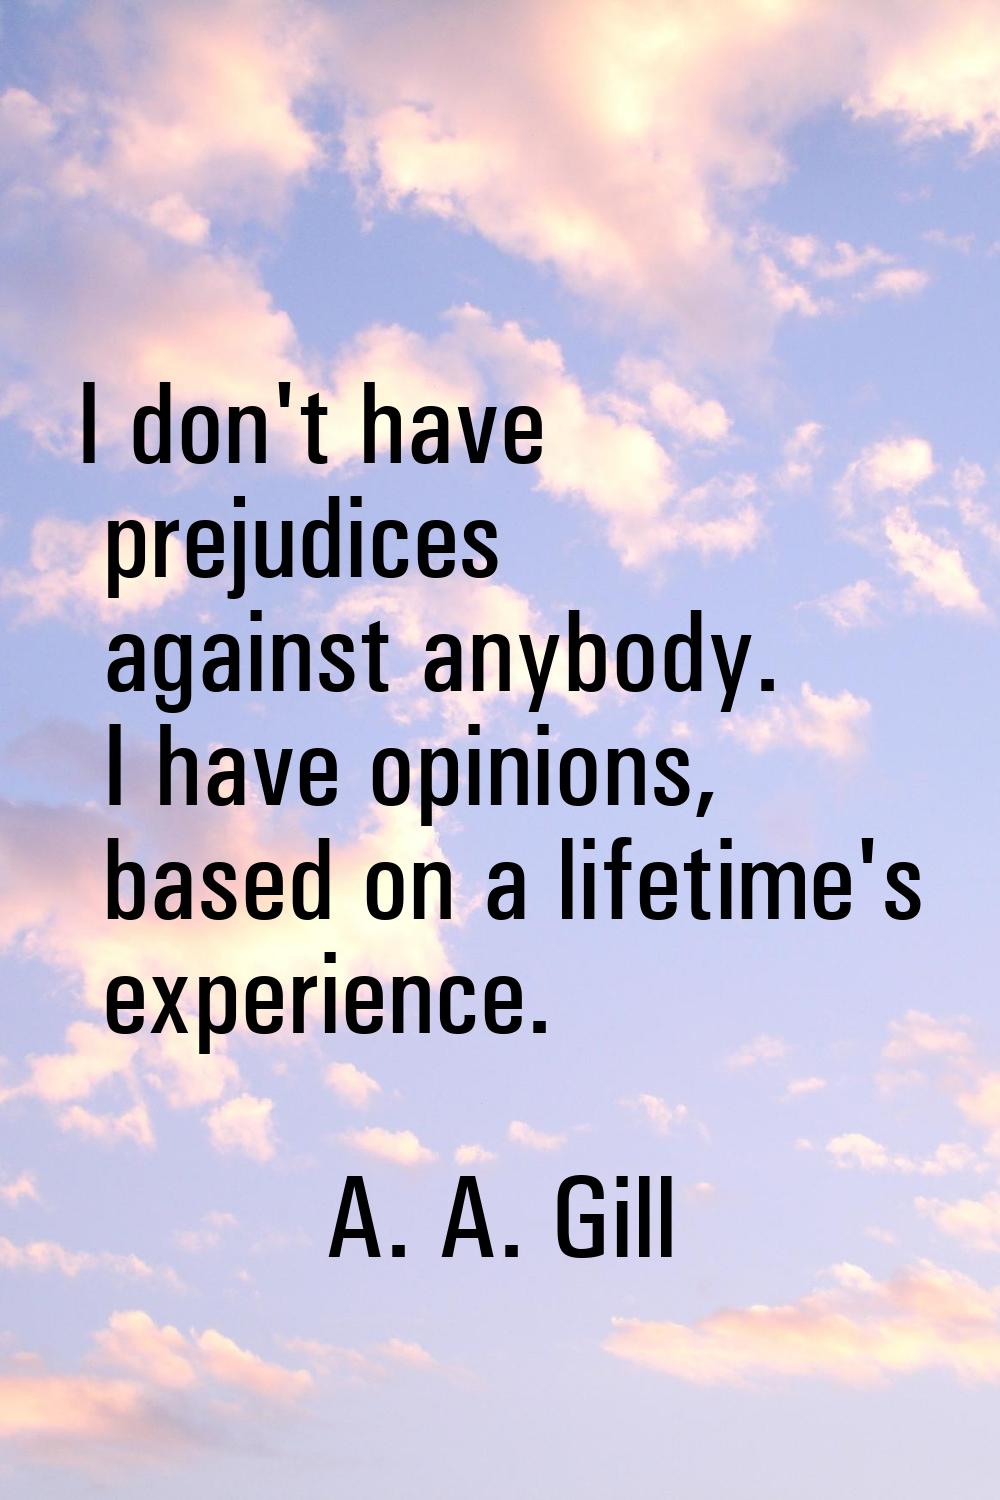 I don't have prejudices against anybody. I have opinions, based on a lifetime's experience.